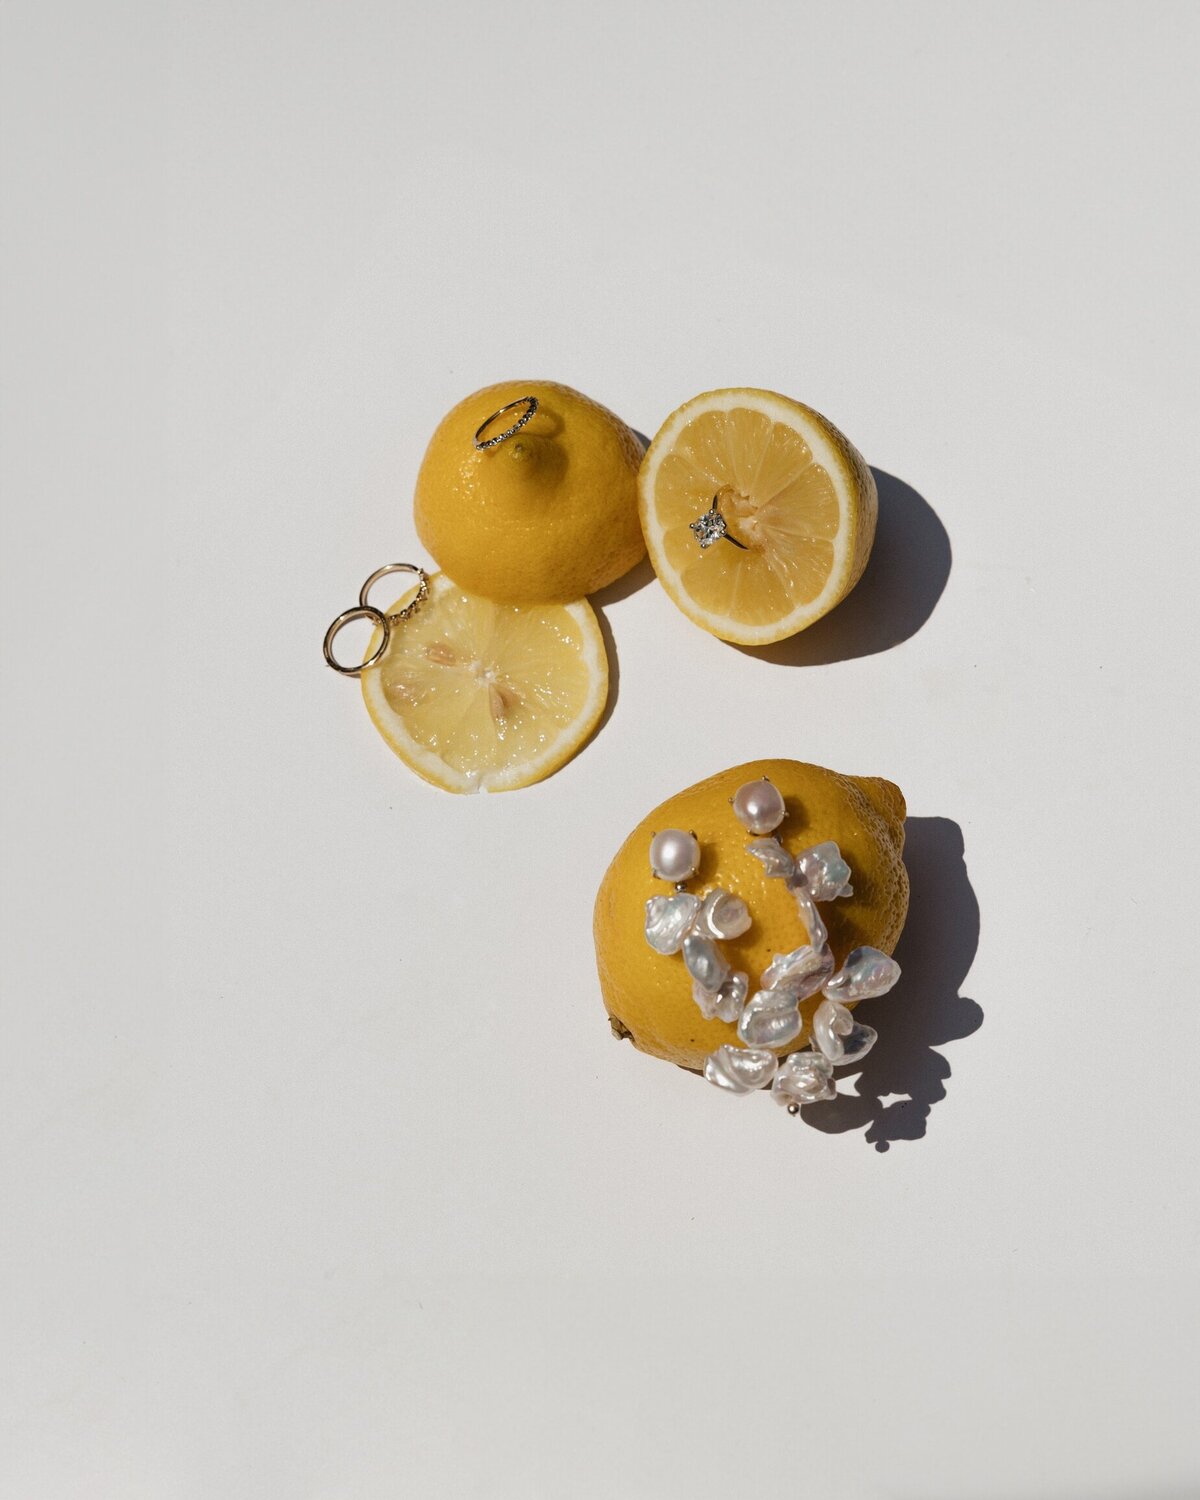 Lemons with set of ring on it